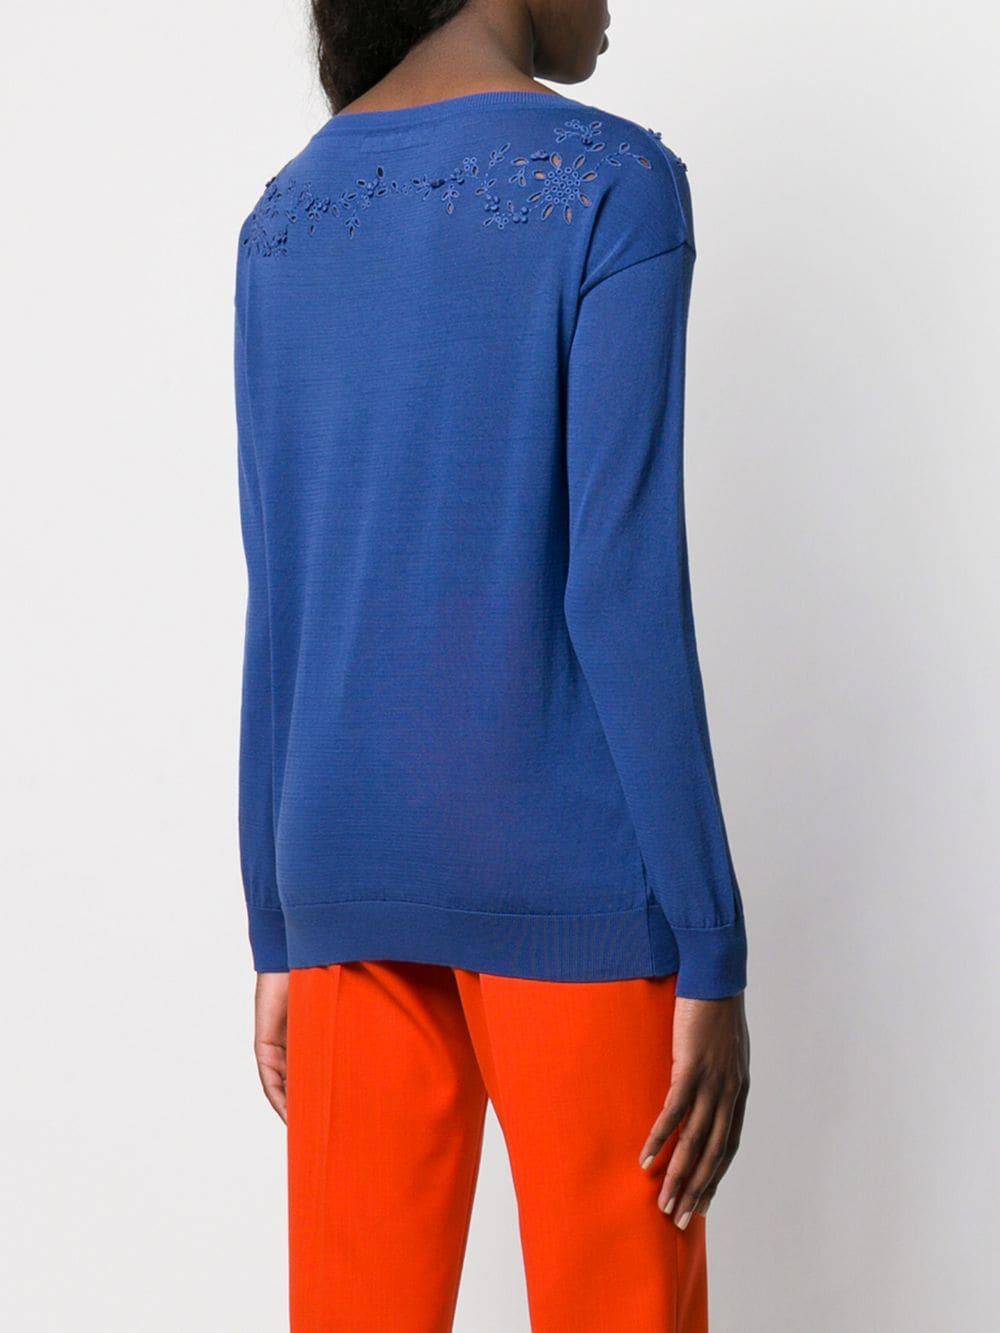 Ermanno Scervino Cotton Embroidered Knit Sweater in Blue - Lyst